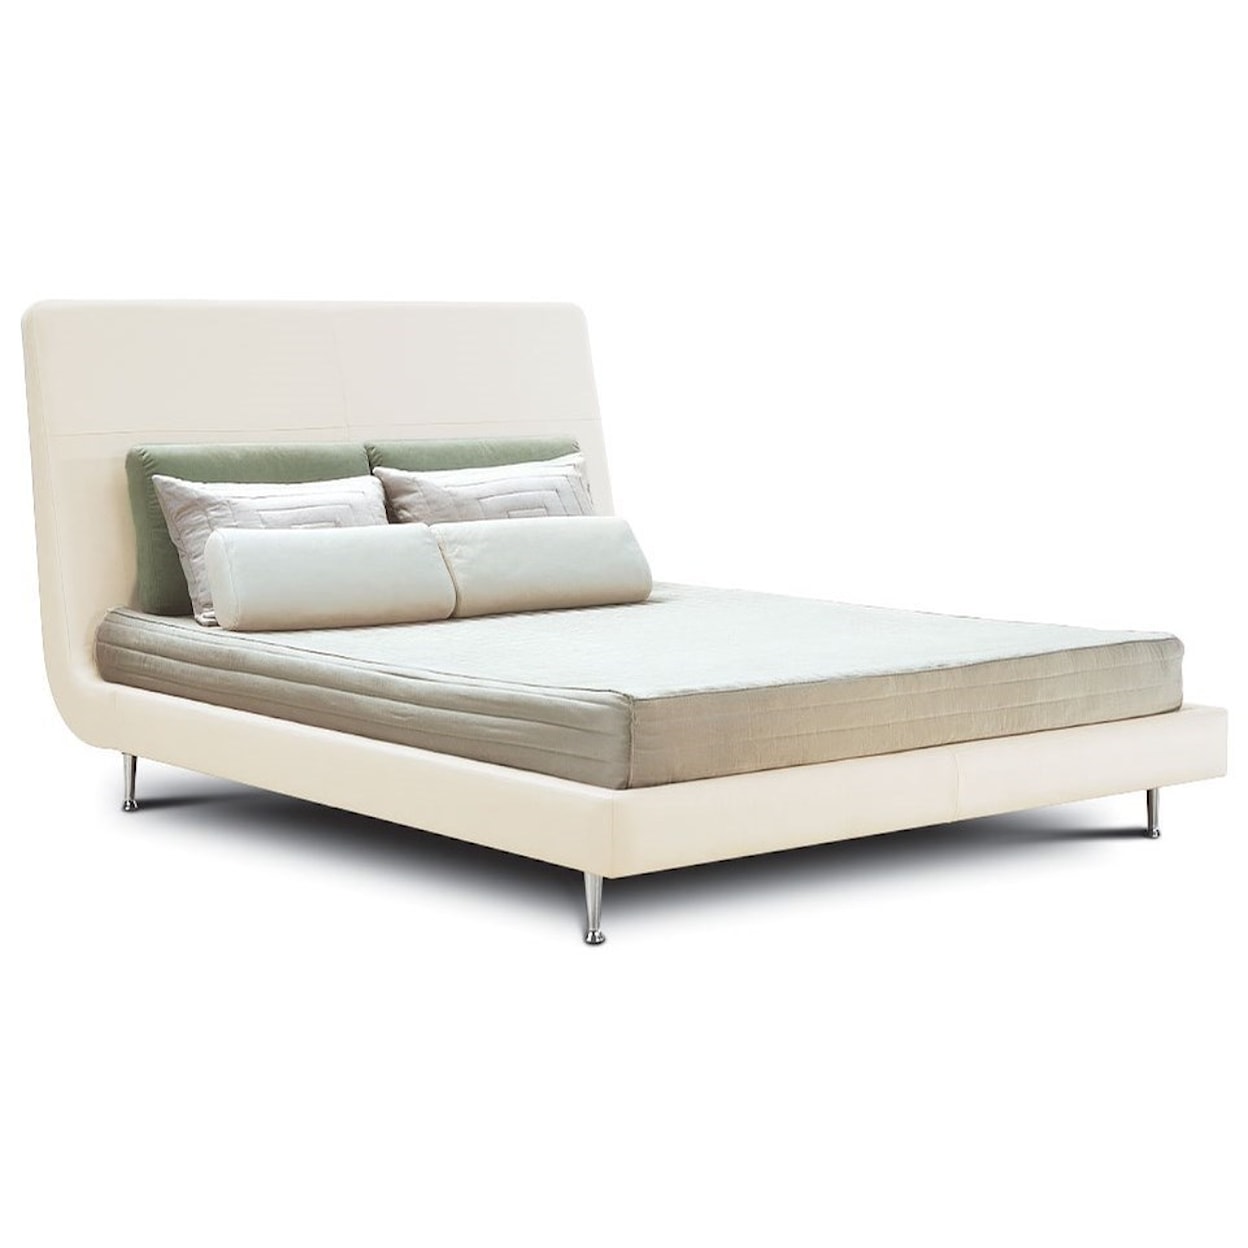 American Leather Menlo Park Bed California King Upholstered Bed